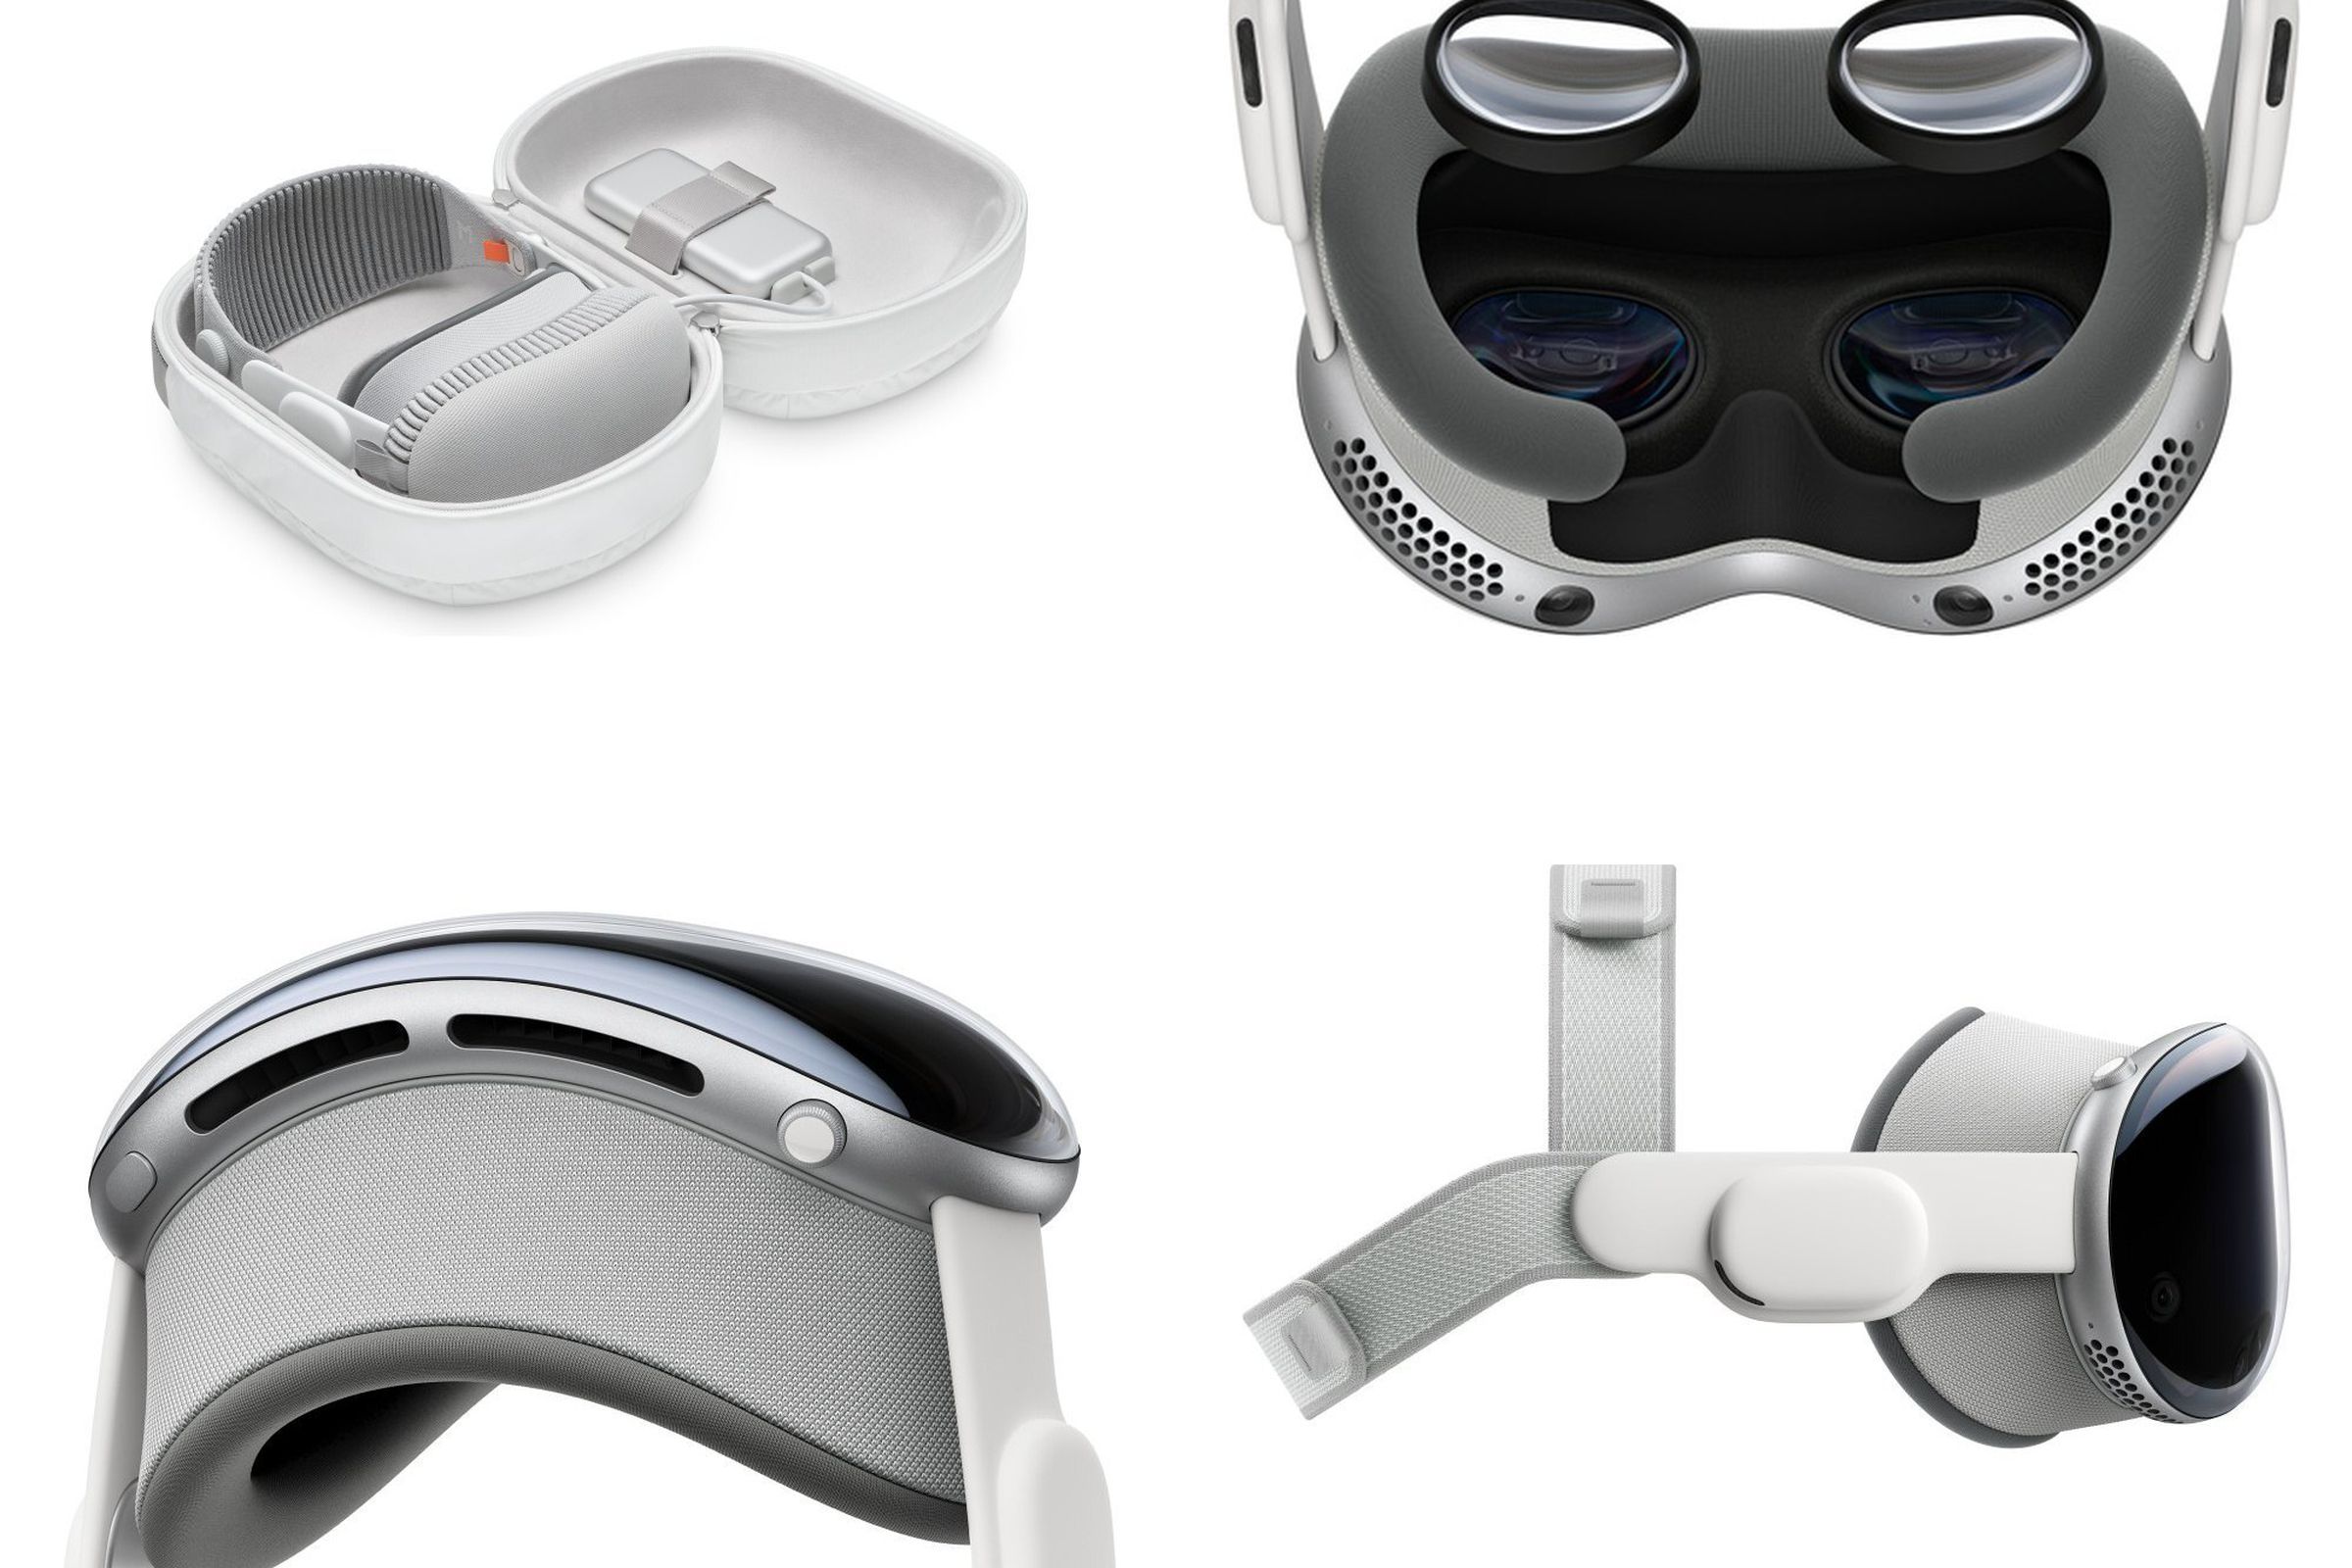 Renders of Apple Vision Pro accessories